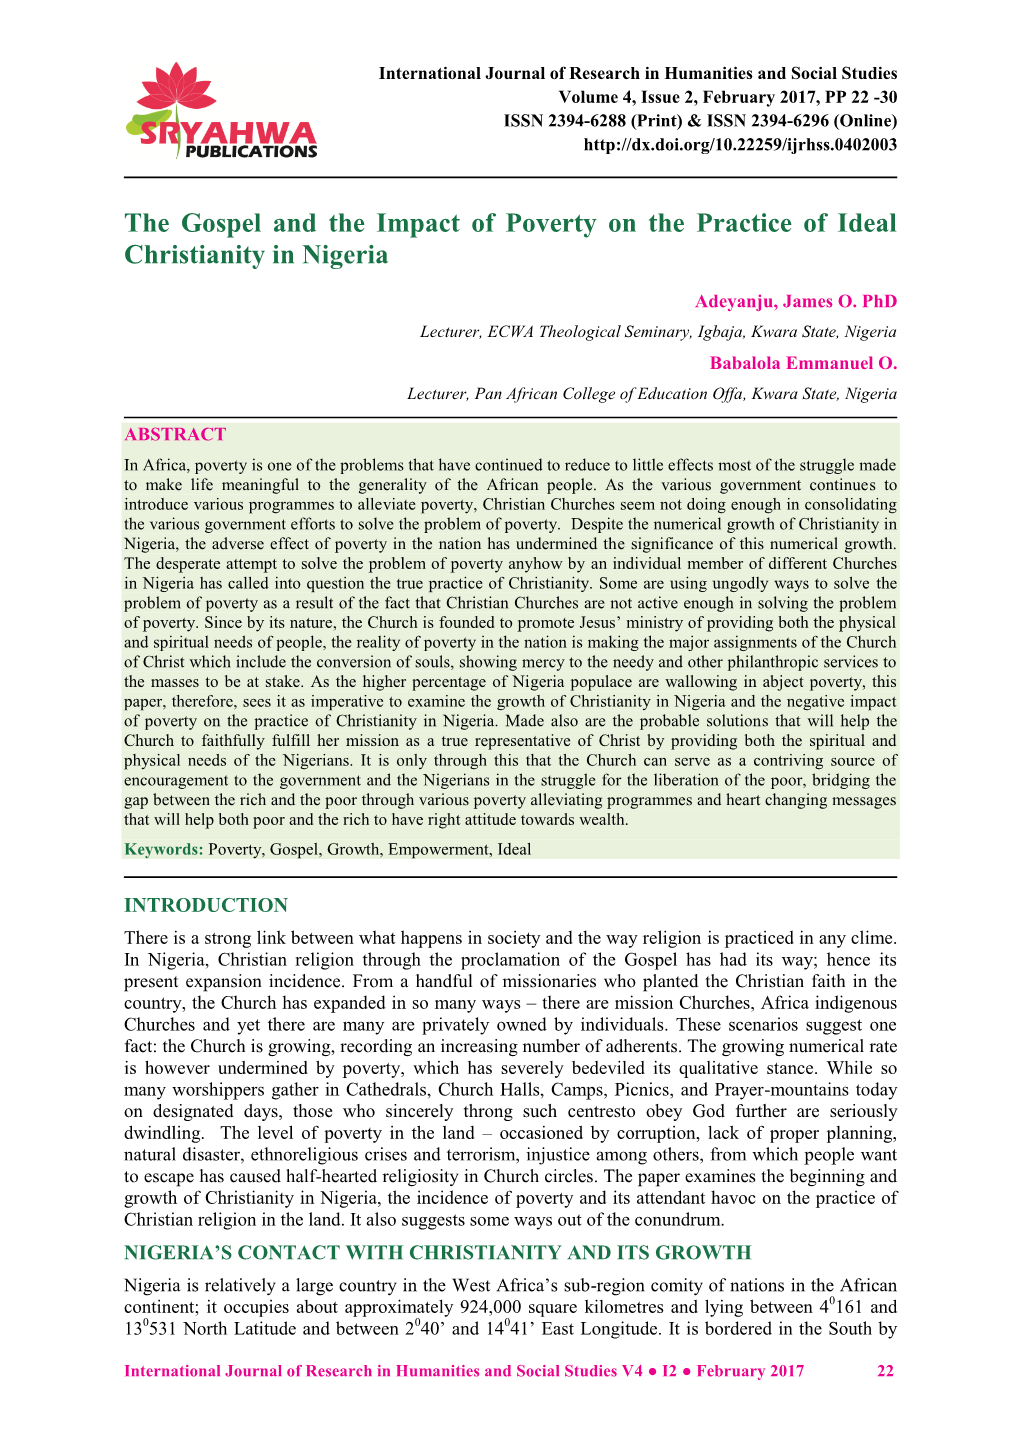 The Gospel and the Impact of Poverty on the Practice of Ideal Christianity in Nigeria